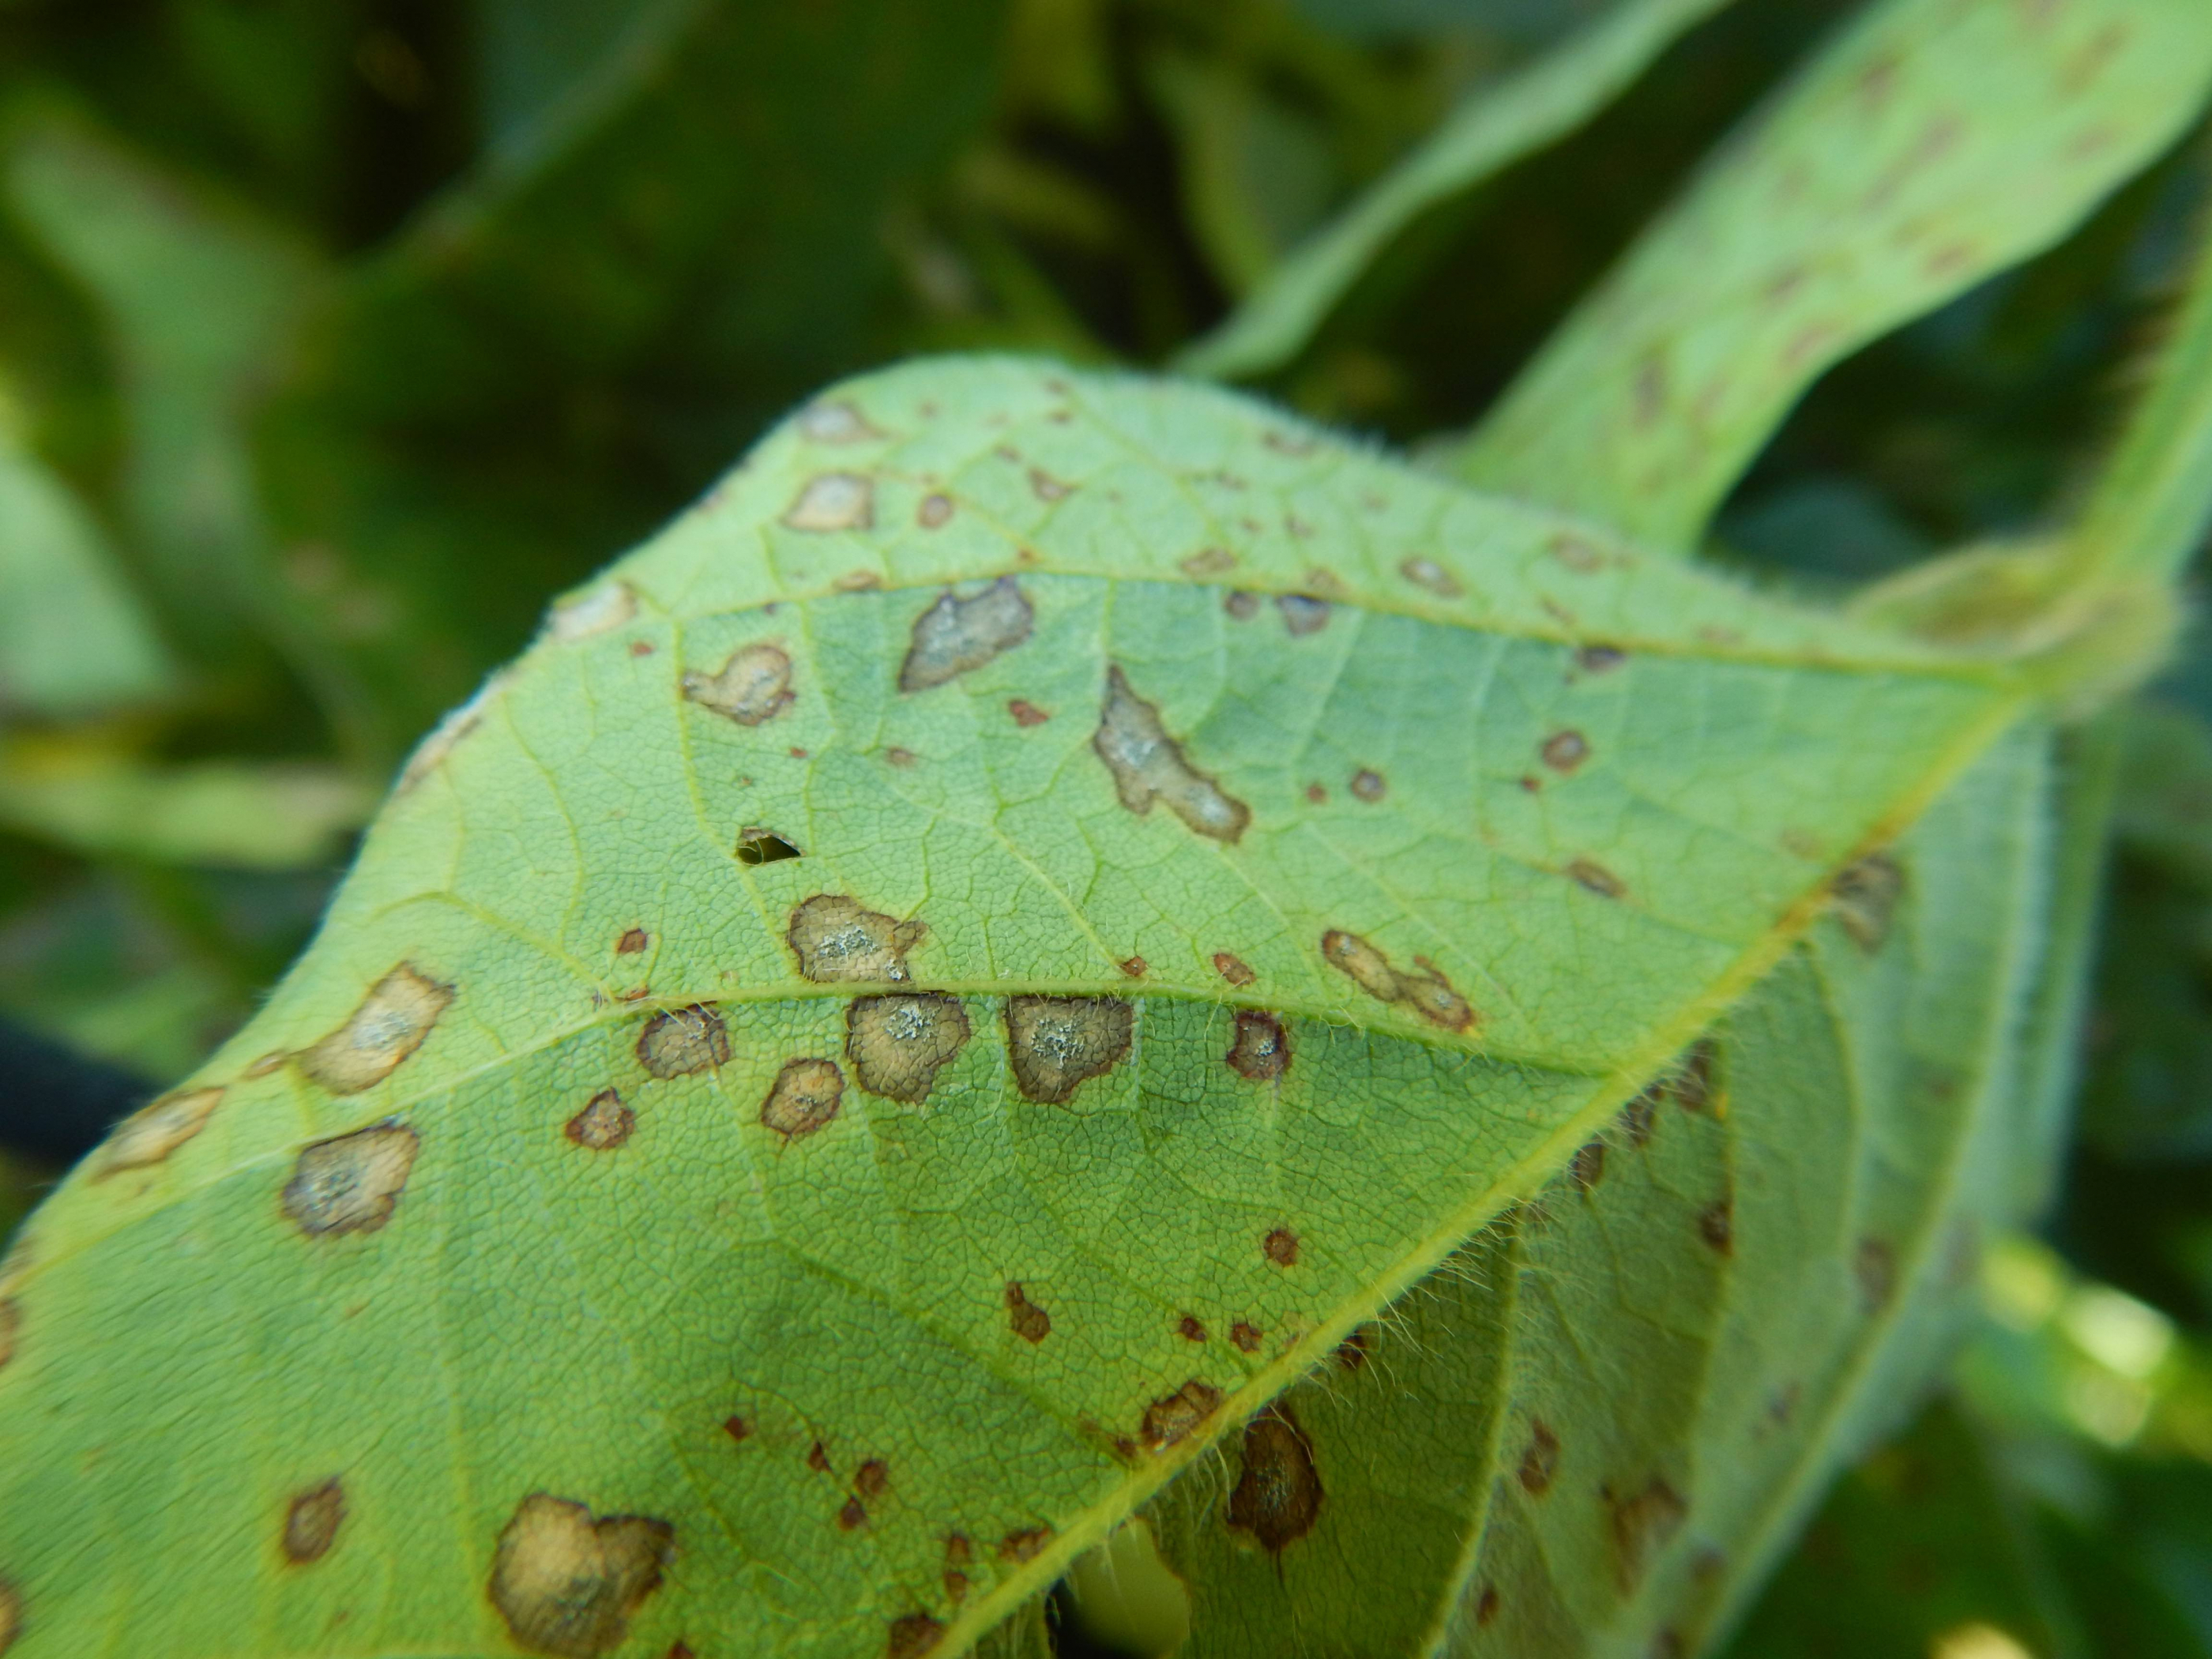 Figure 4. Fuzzy gray sporulation (conidia) of the frogeye leaf spot fungus can sometimes occur in lesions on the undersides of leaves.